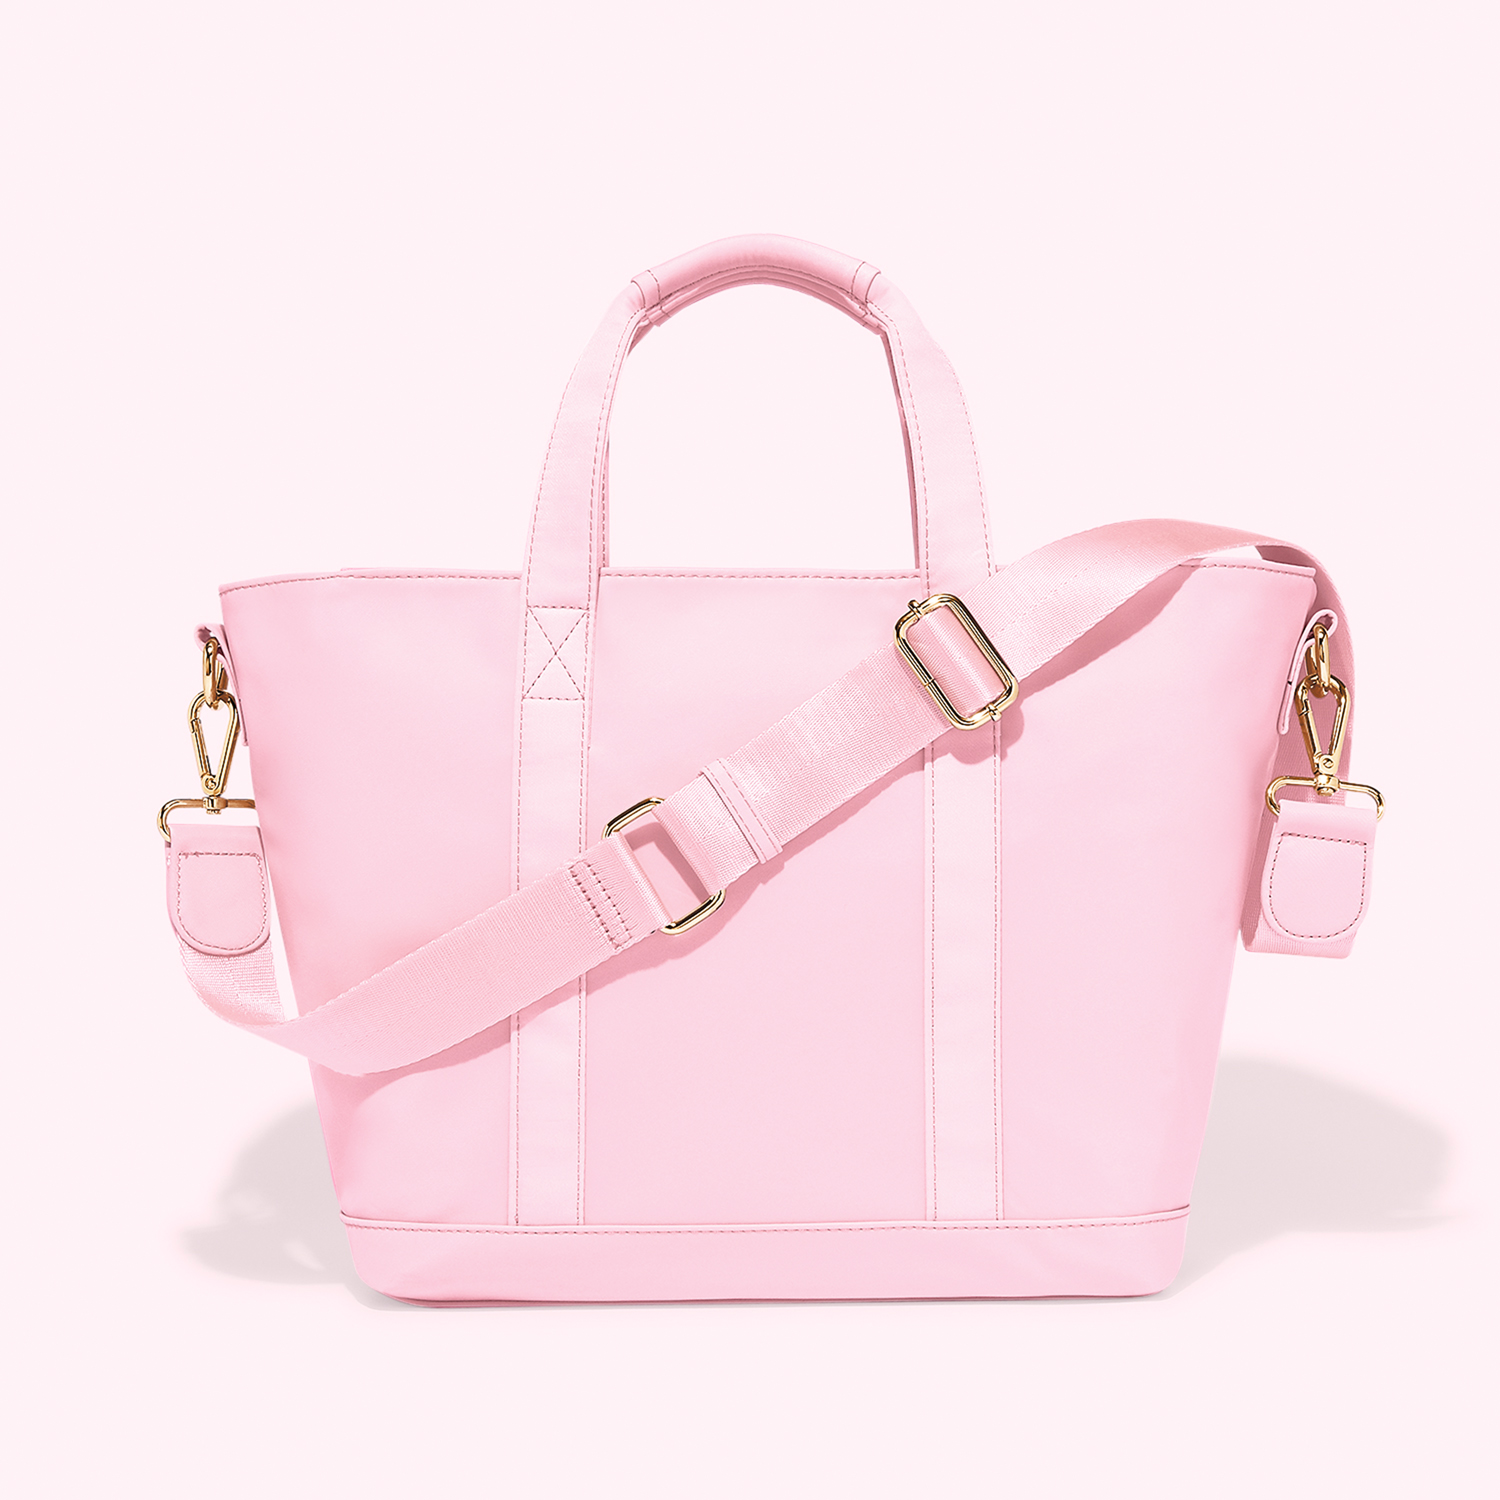 Save up to 70% on handbags, totes and more: Shop for items under